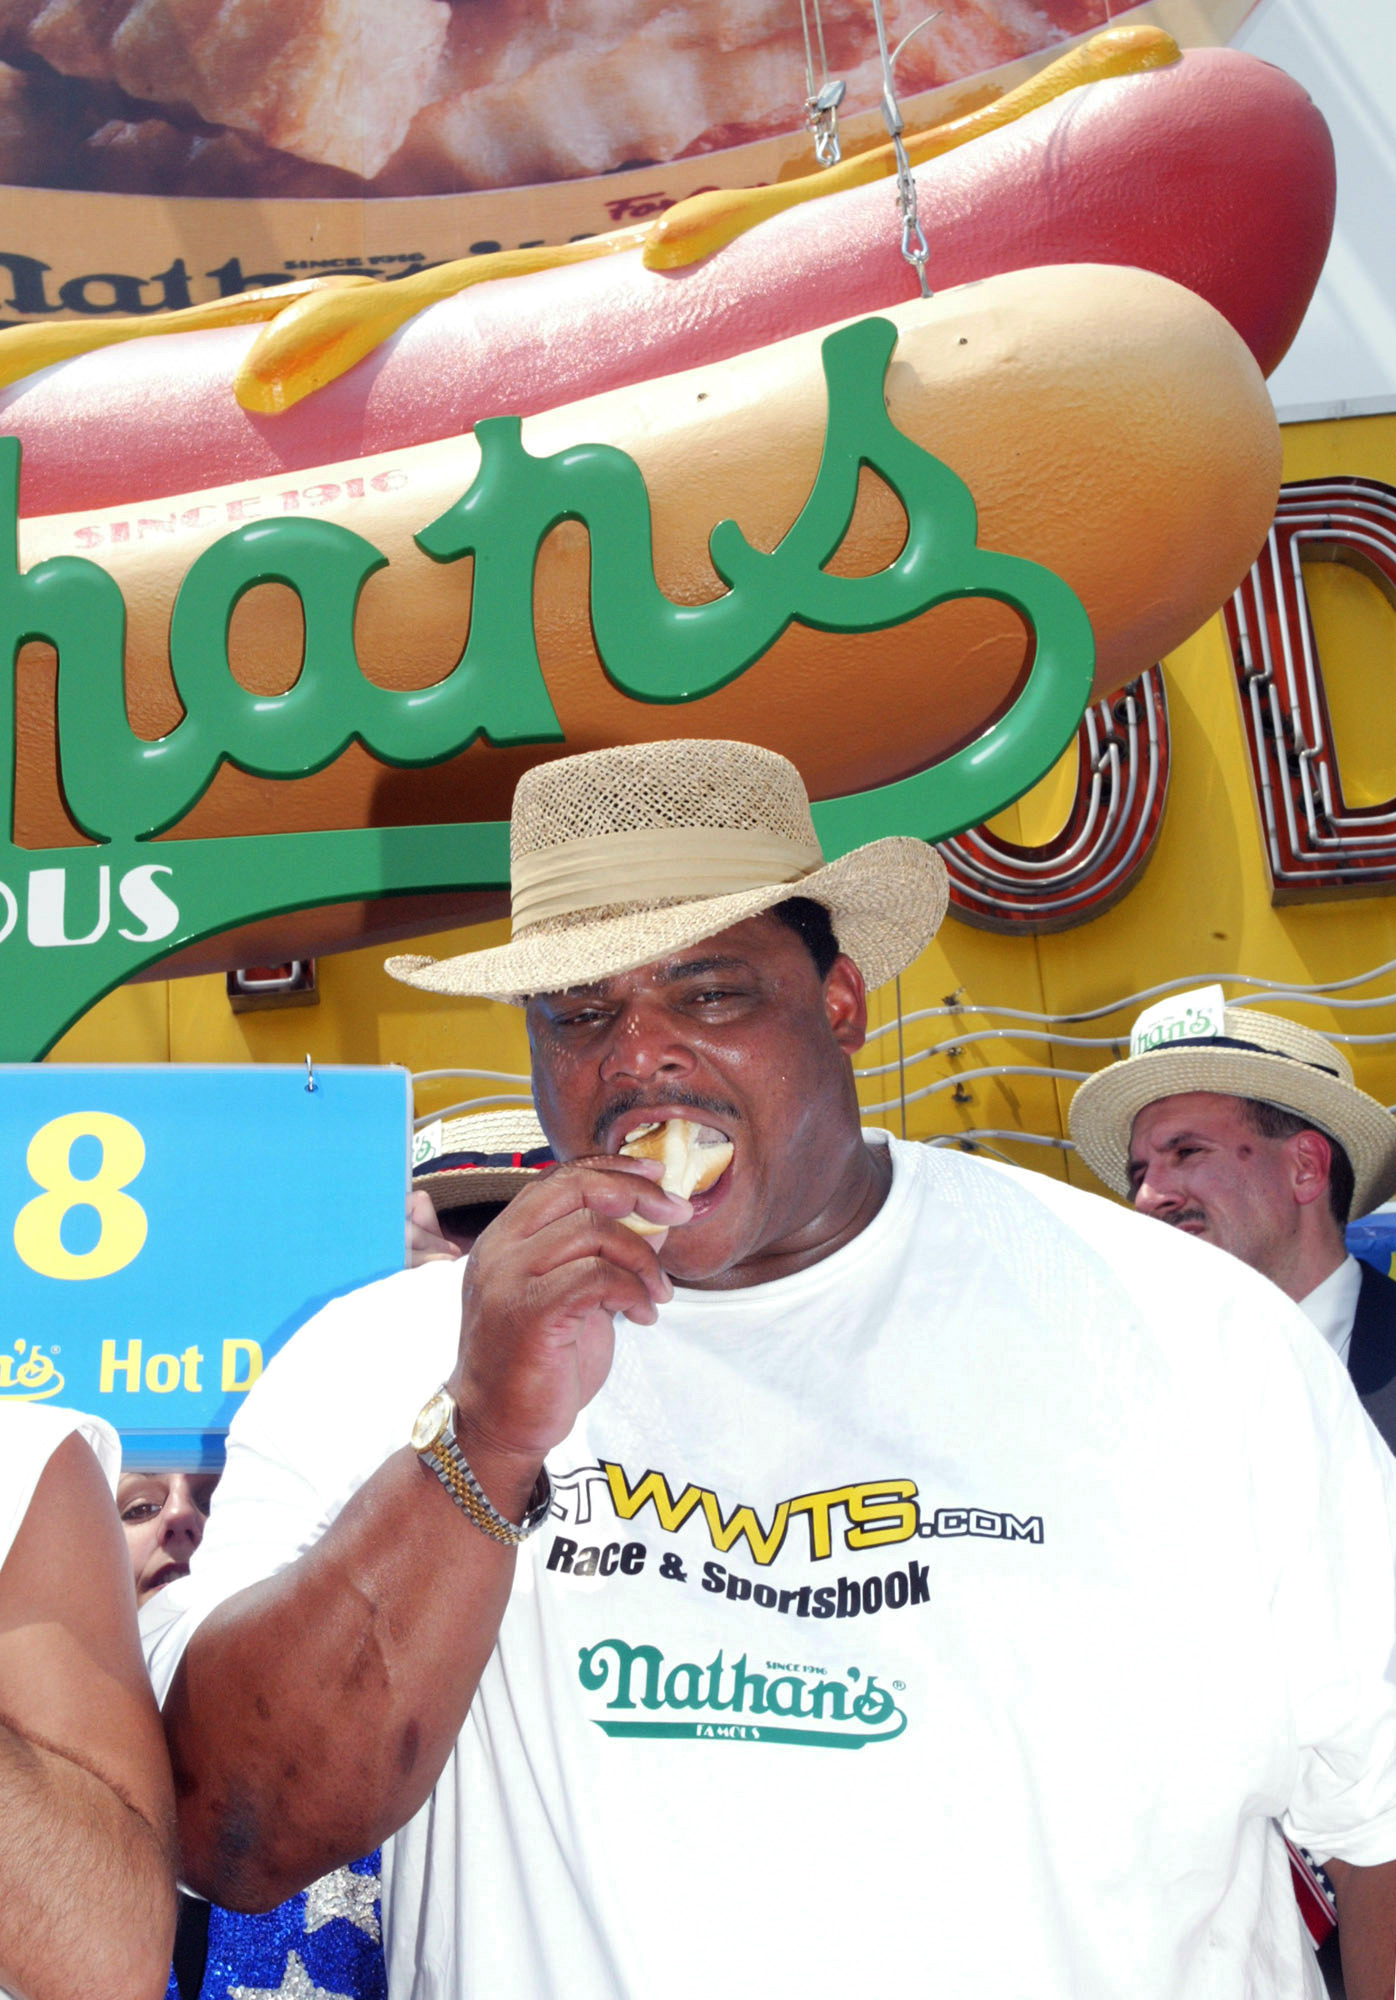 Former Chicago Bears football star William "the Refrigerator" Perry competes in the Nathan's Famous Fourth of July Hot Dog Eating Contest Friday, July 4, 2003, in New York's Coney Island. Perry conceded after eating only four hot dogs and buns in five minutes while the defending champion Takeru Kobayashi of Japan came in first place by eating 44 1/2 hot dogs and buns in twelve minutes. (AP Photo/Akira Ono)